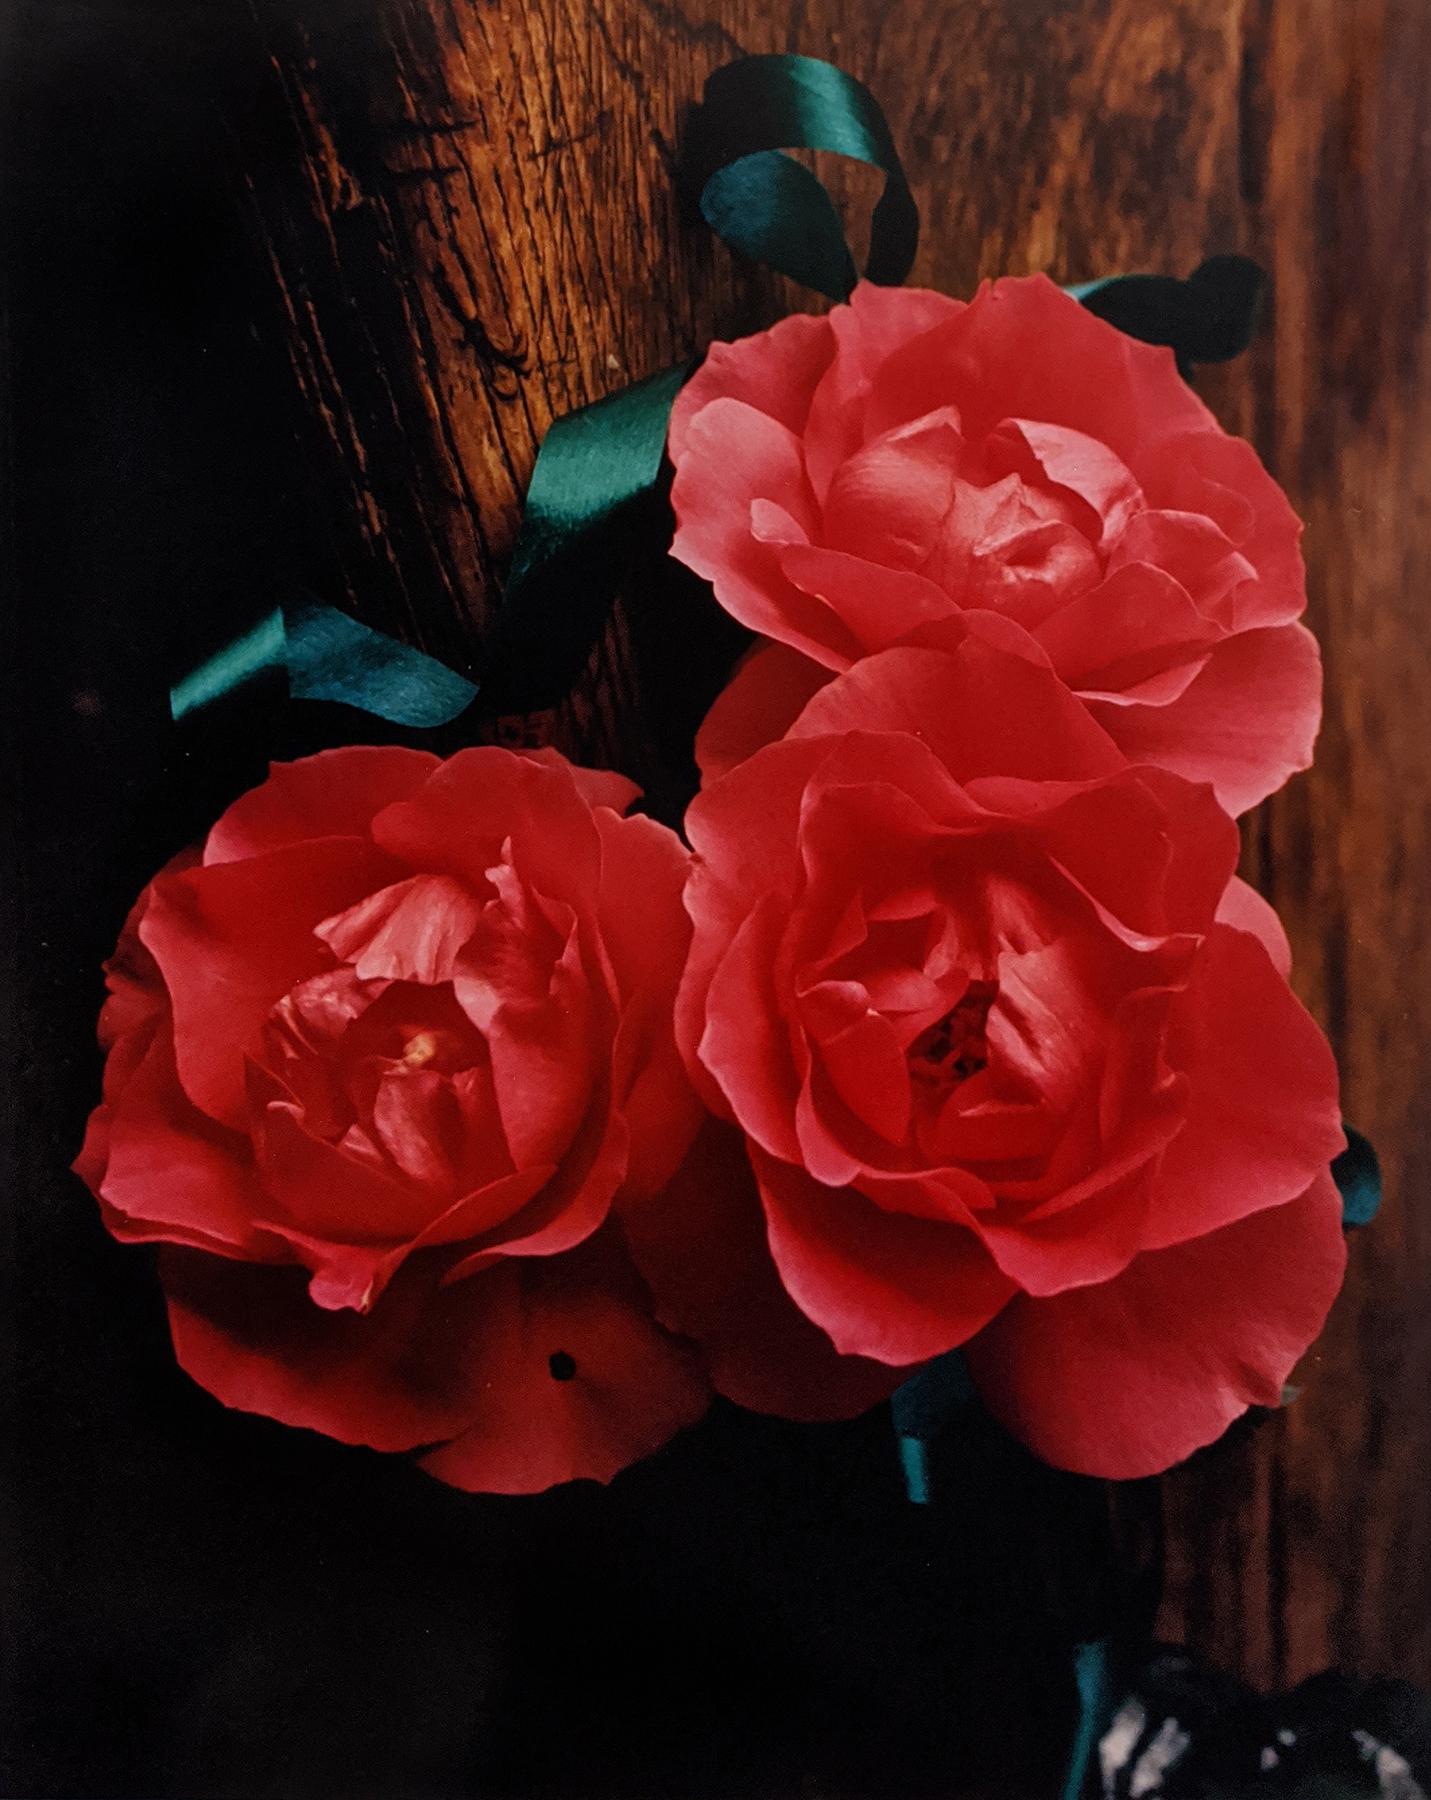 Horst P. Horst Color Photograph - Three Roses, c. 1985